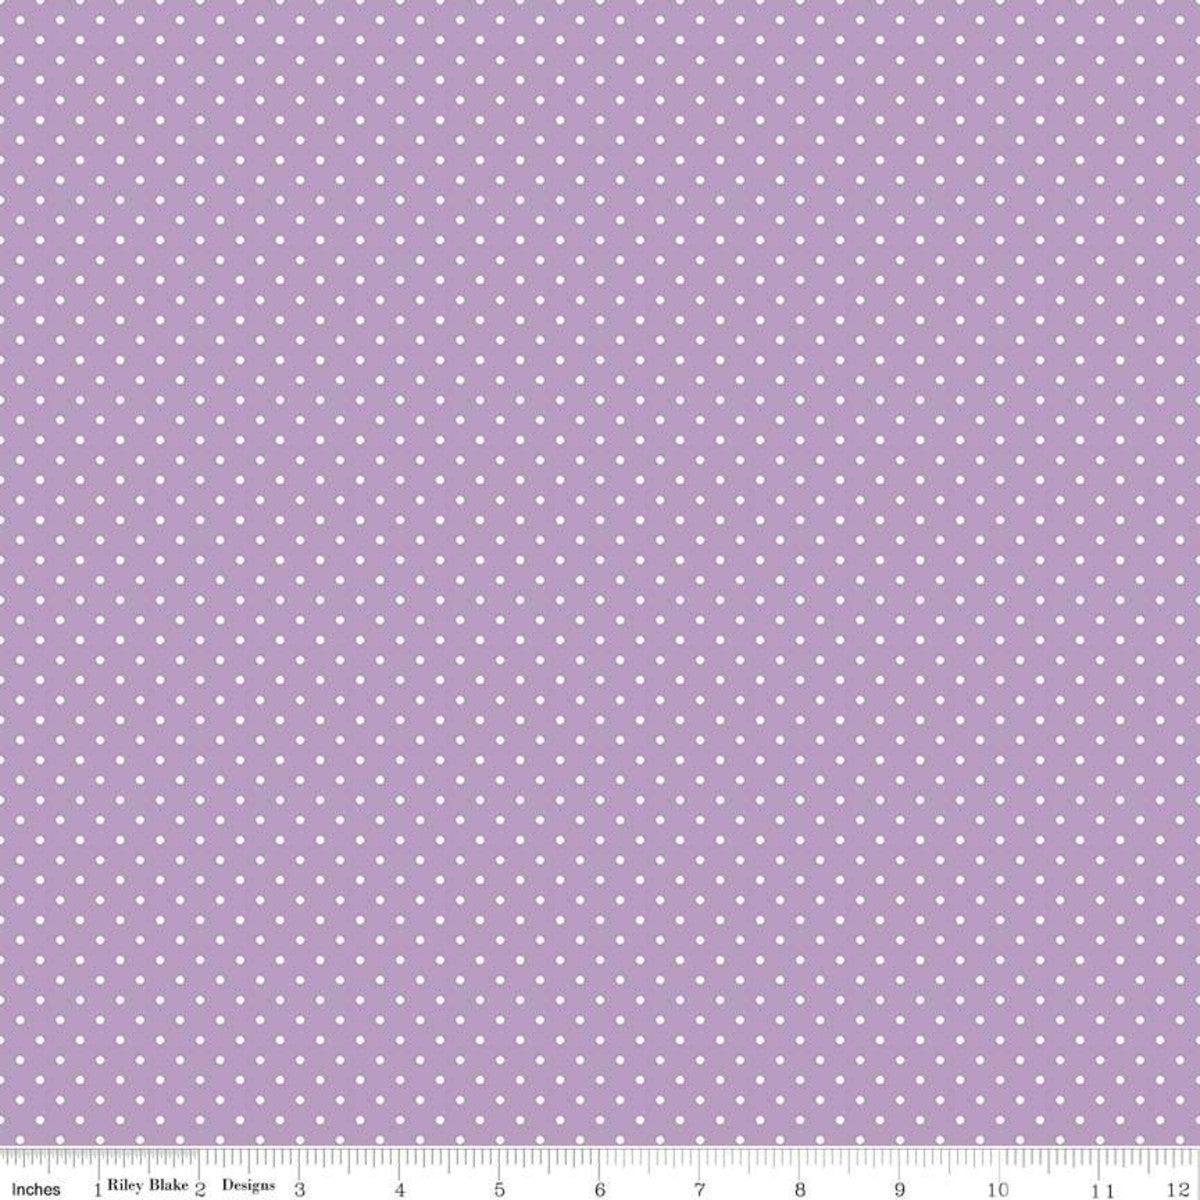 White Swiss (Polka) Dots - Lavender Background Fabric, 100% Cotton, Ref. C670-125 LAVENDER, Swiss Dots Collection by Riley Blake Designs®